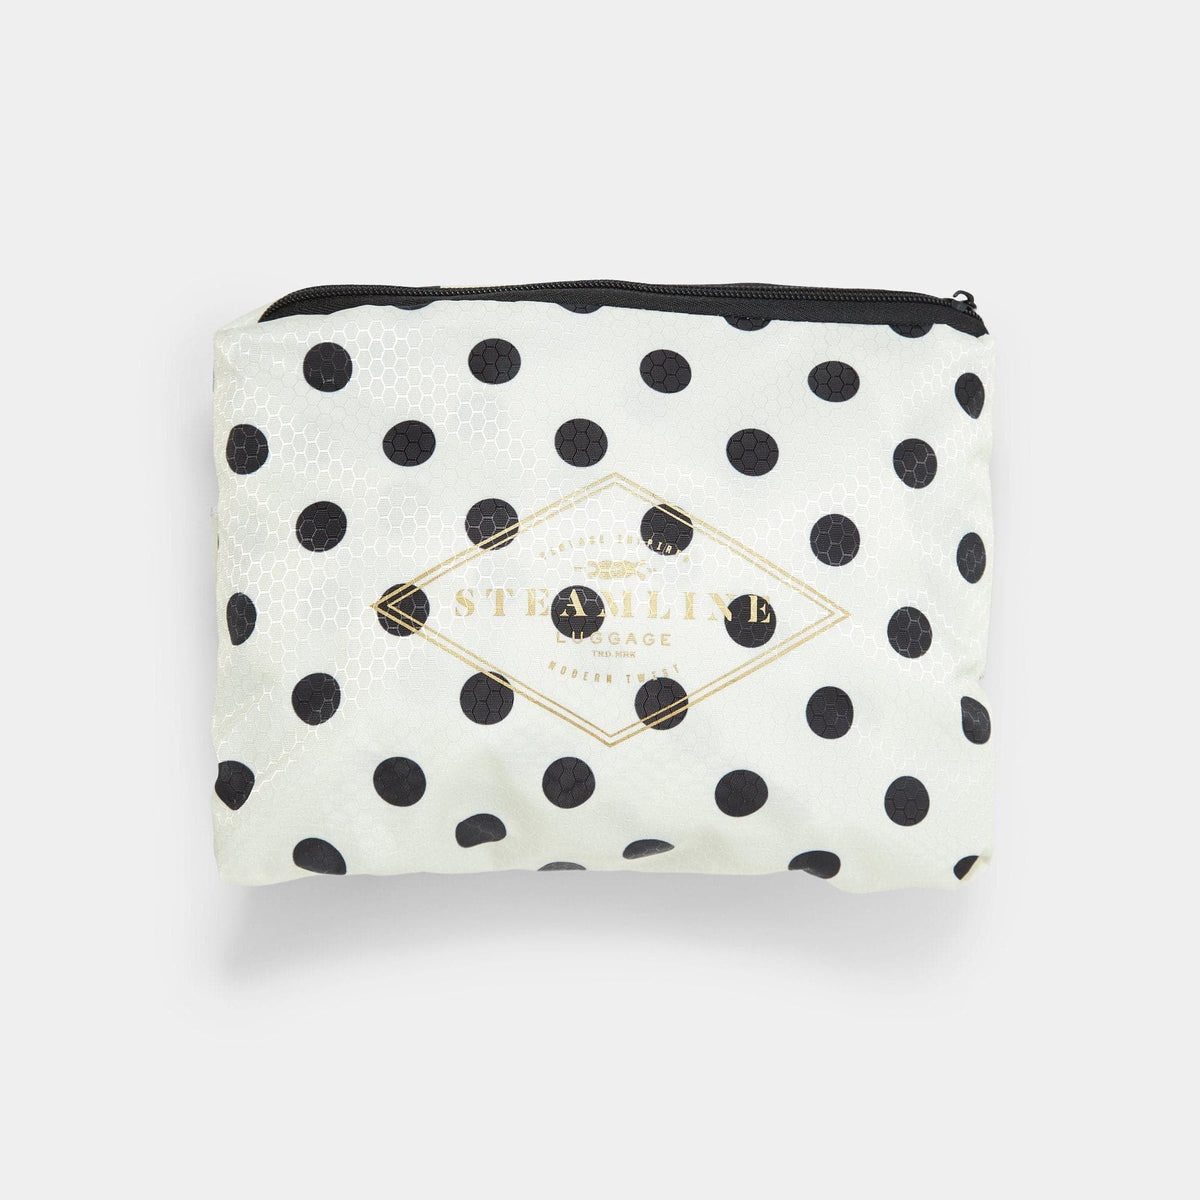 The Polka Dots Protective Cover - Spinner Size Protective Cover Steamline Luggage 